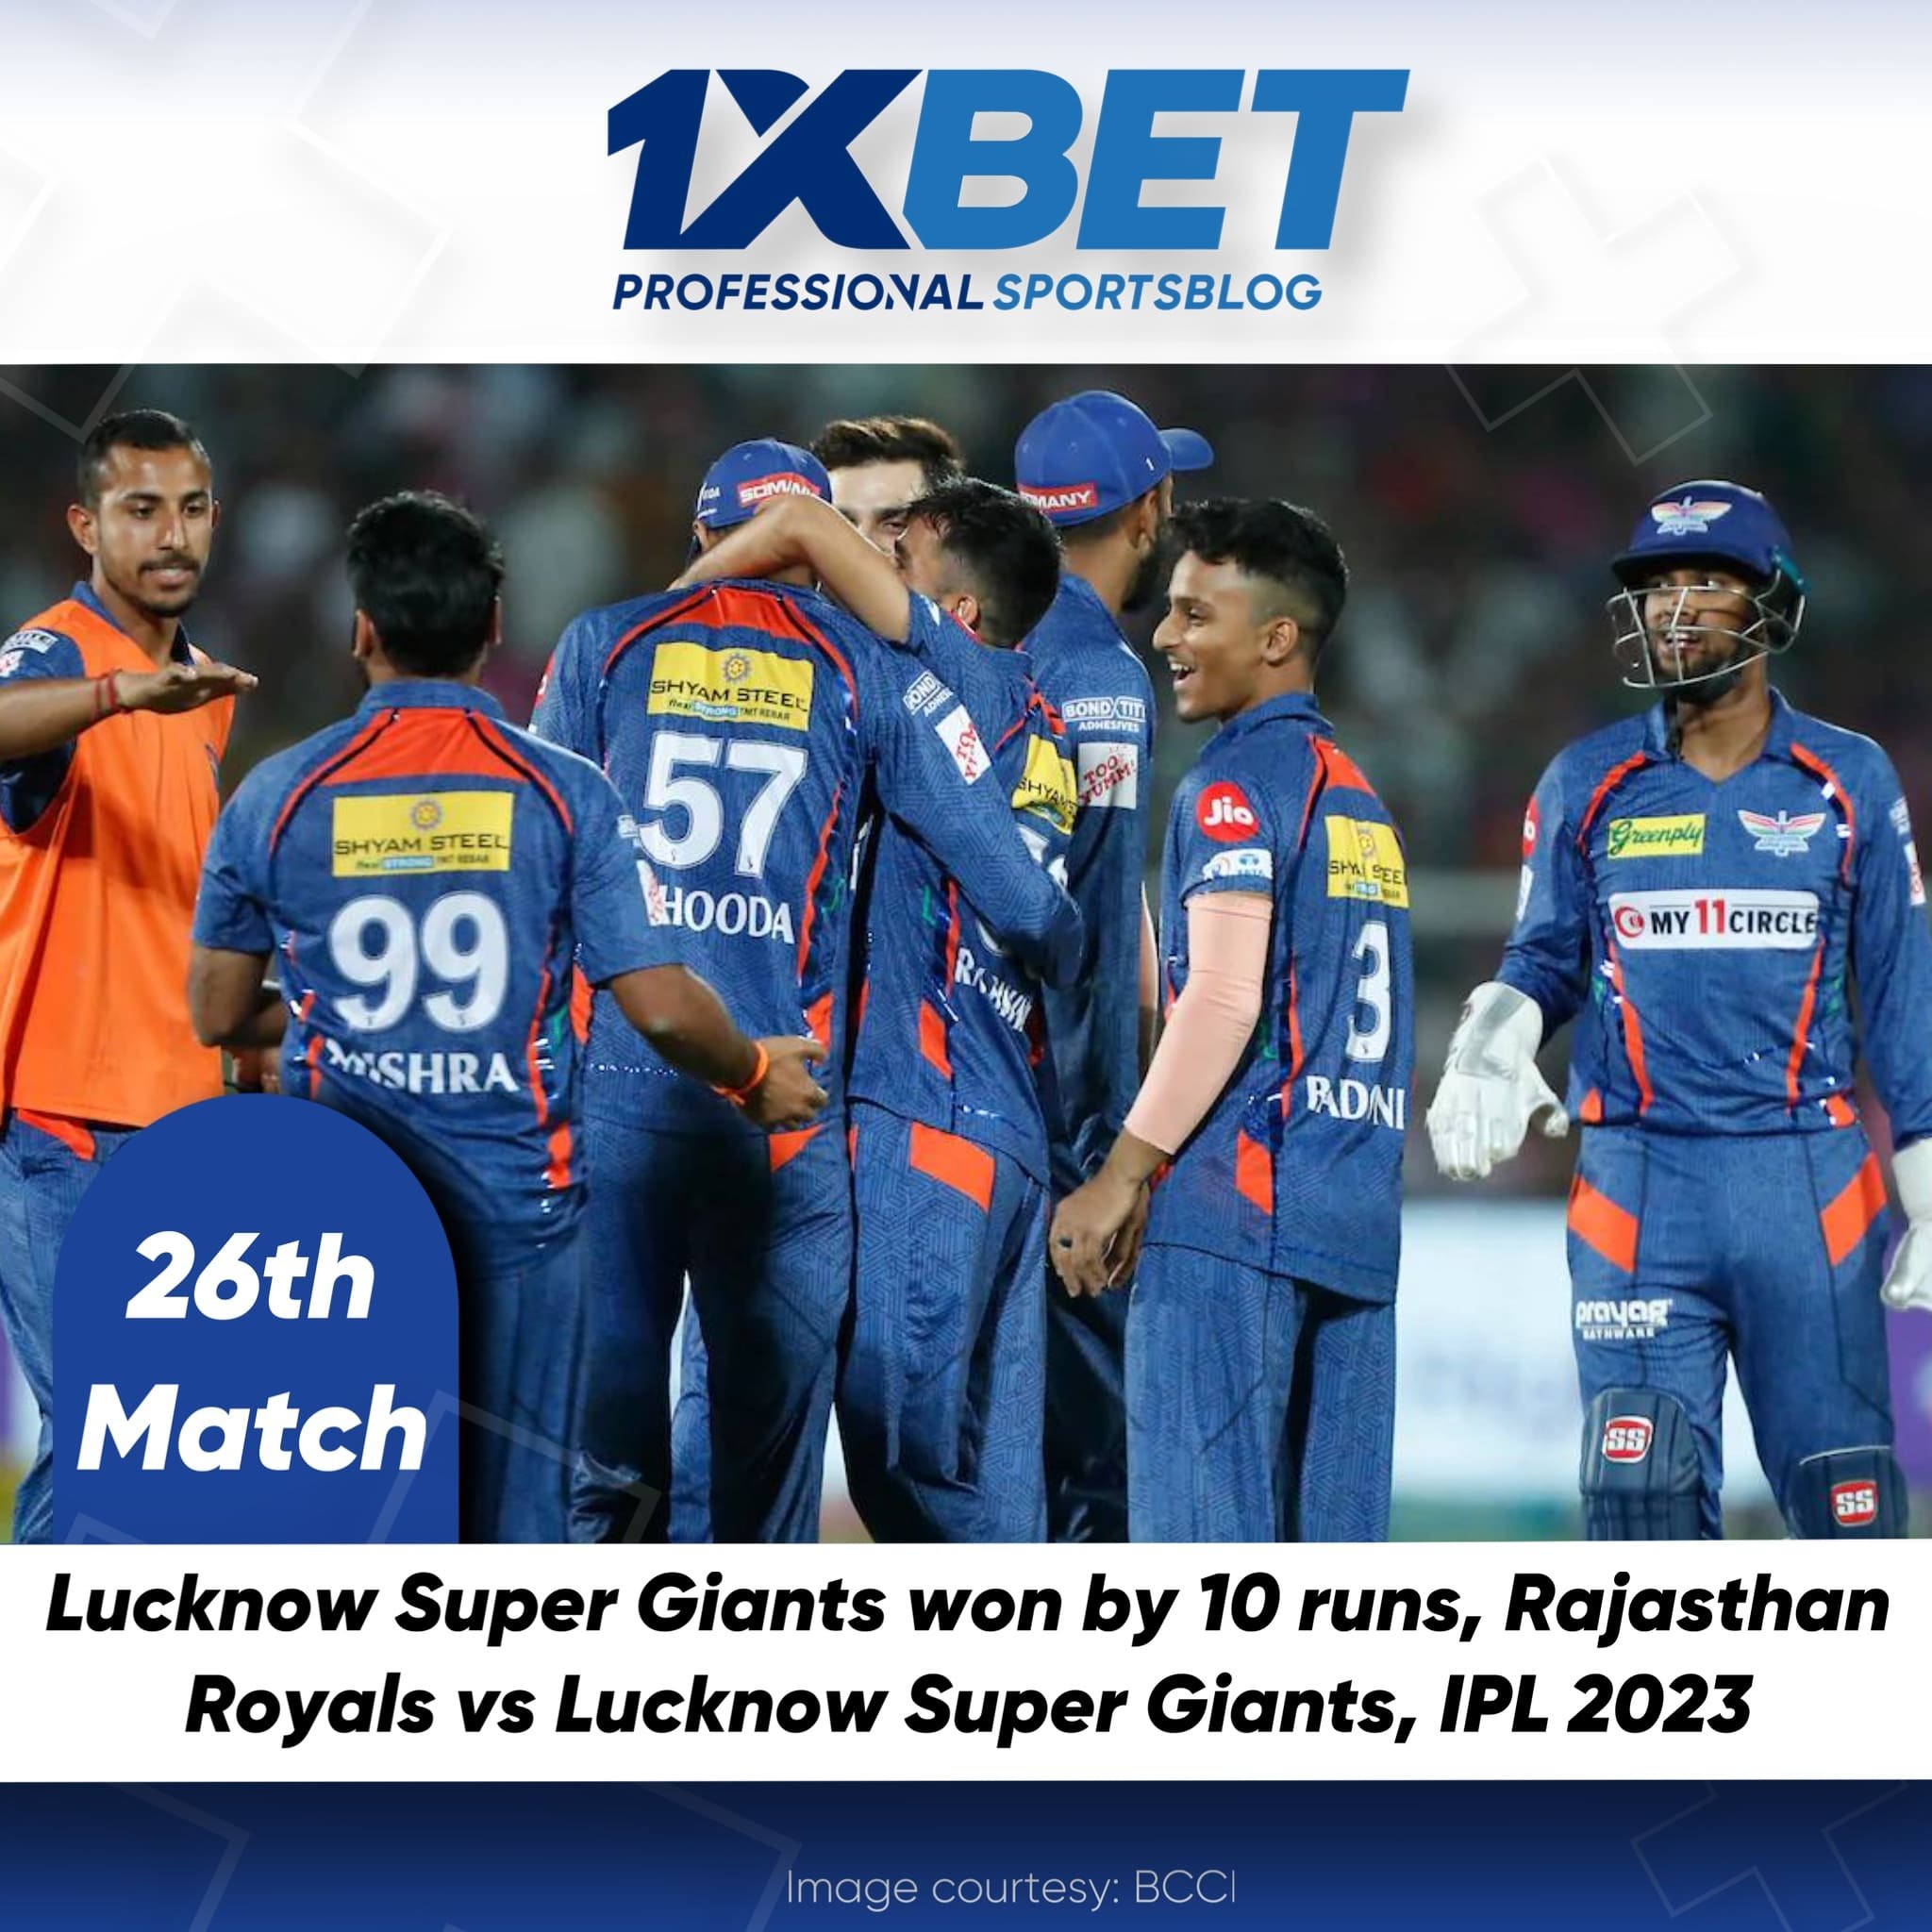 Lucknow Super Giants won by 10 runs